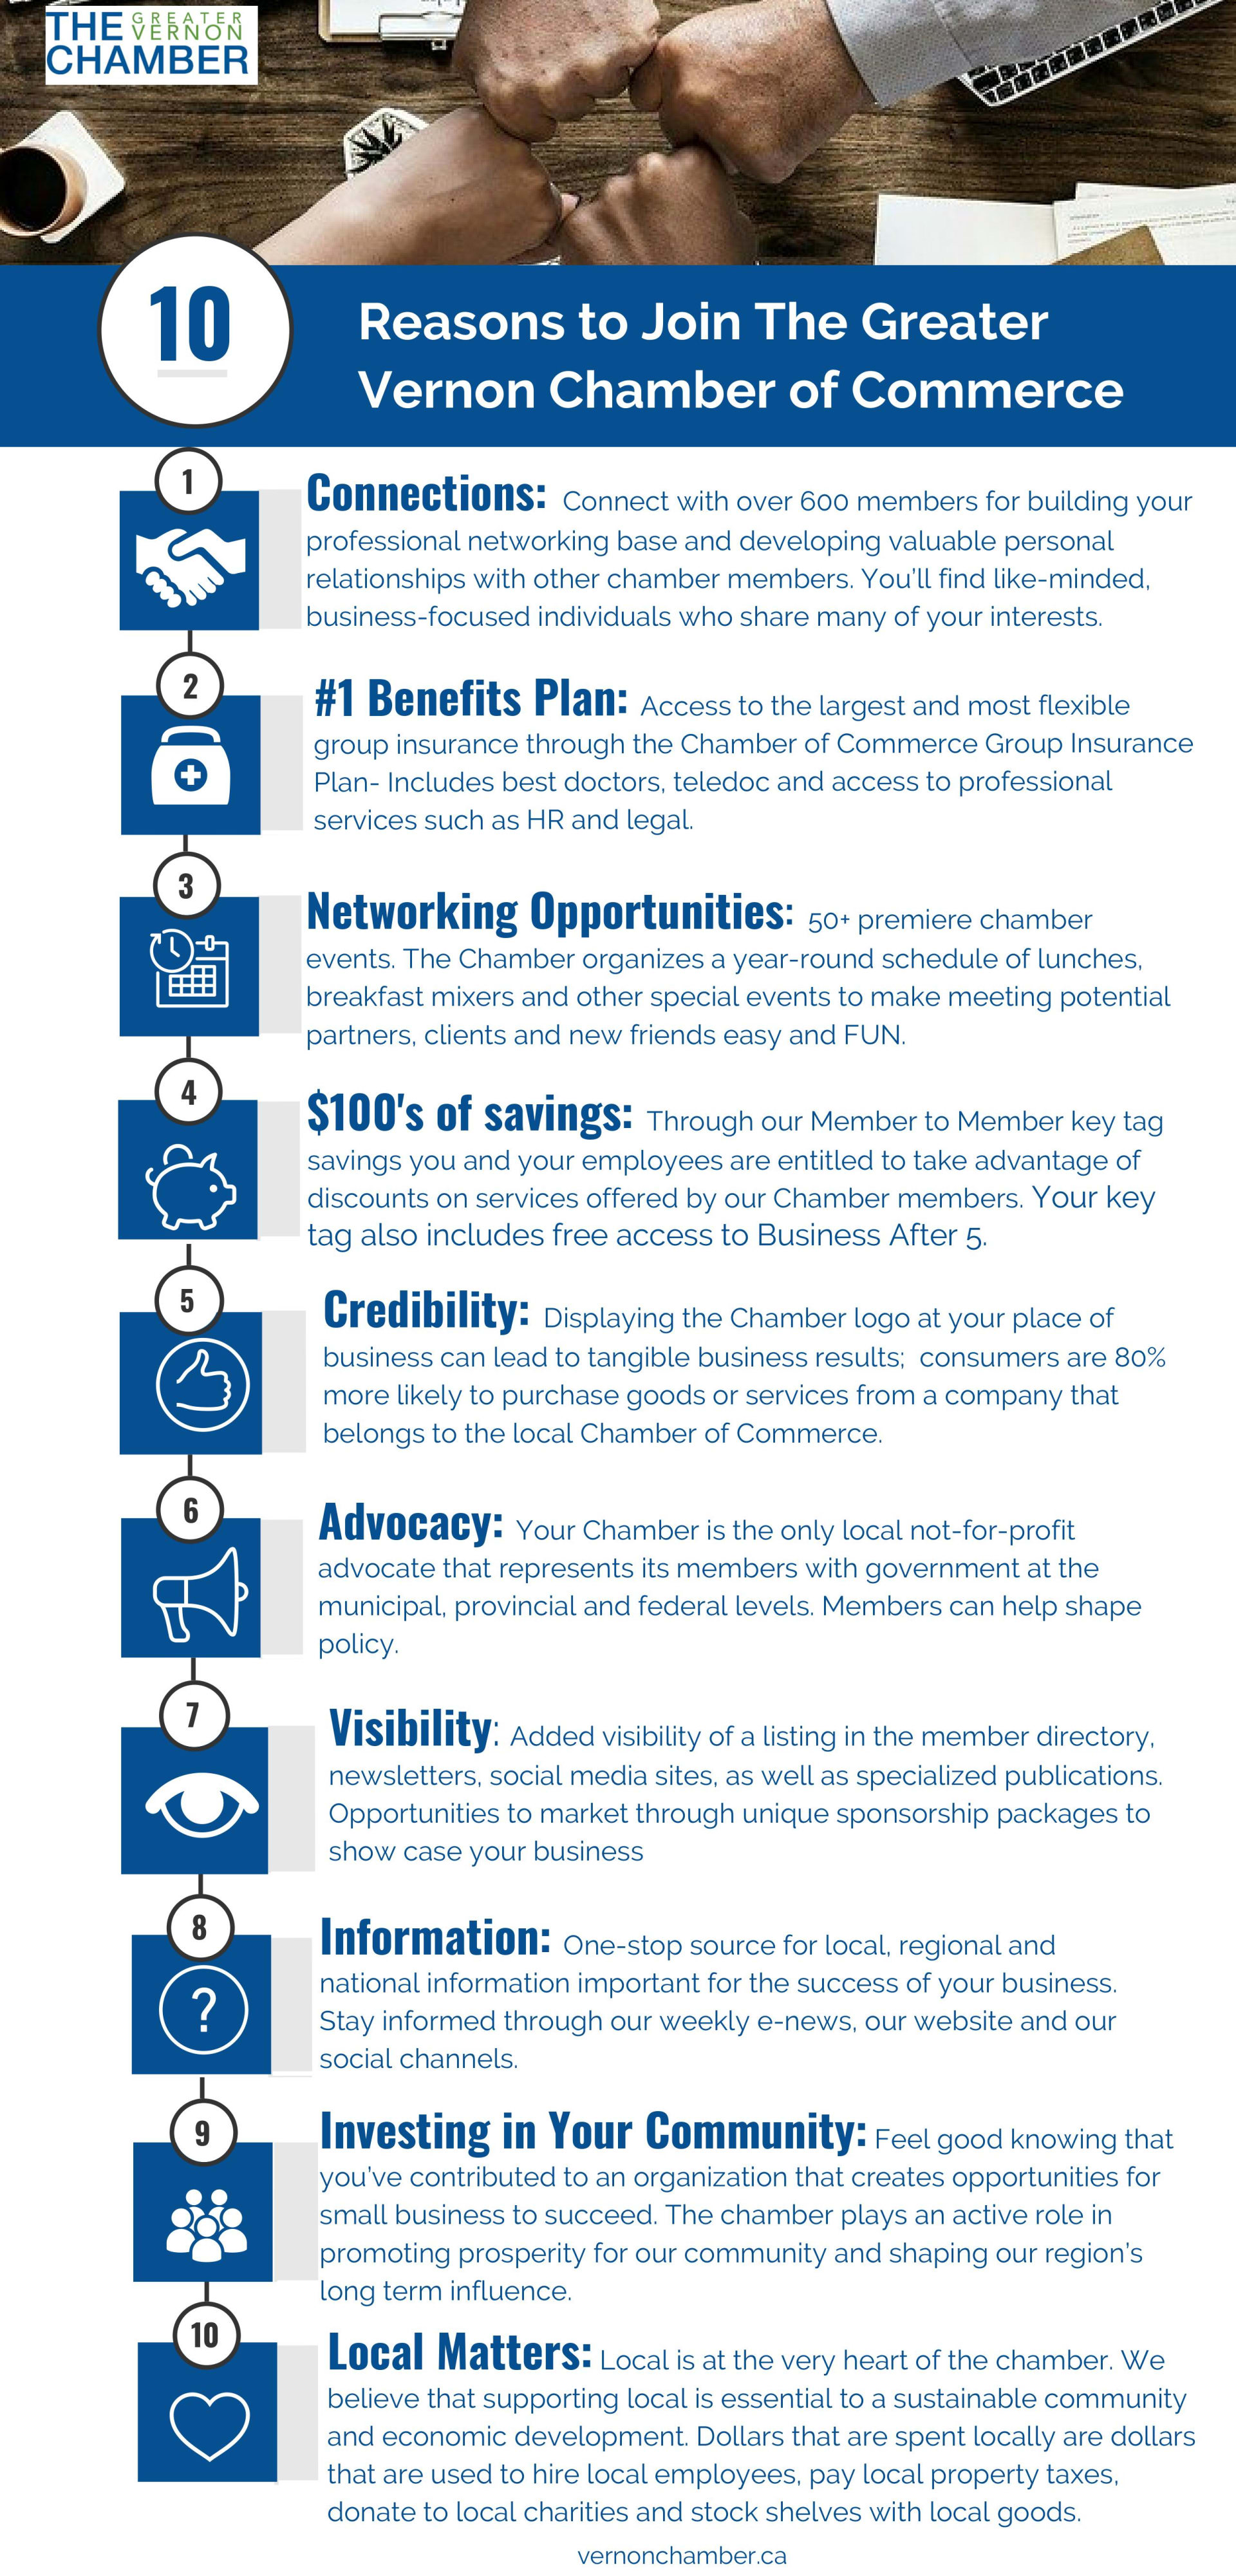 10 Reasons to Join the Chamber